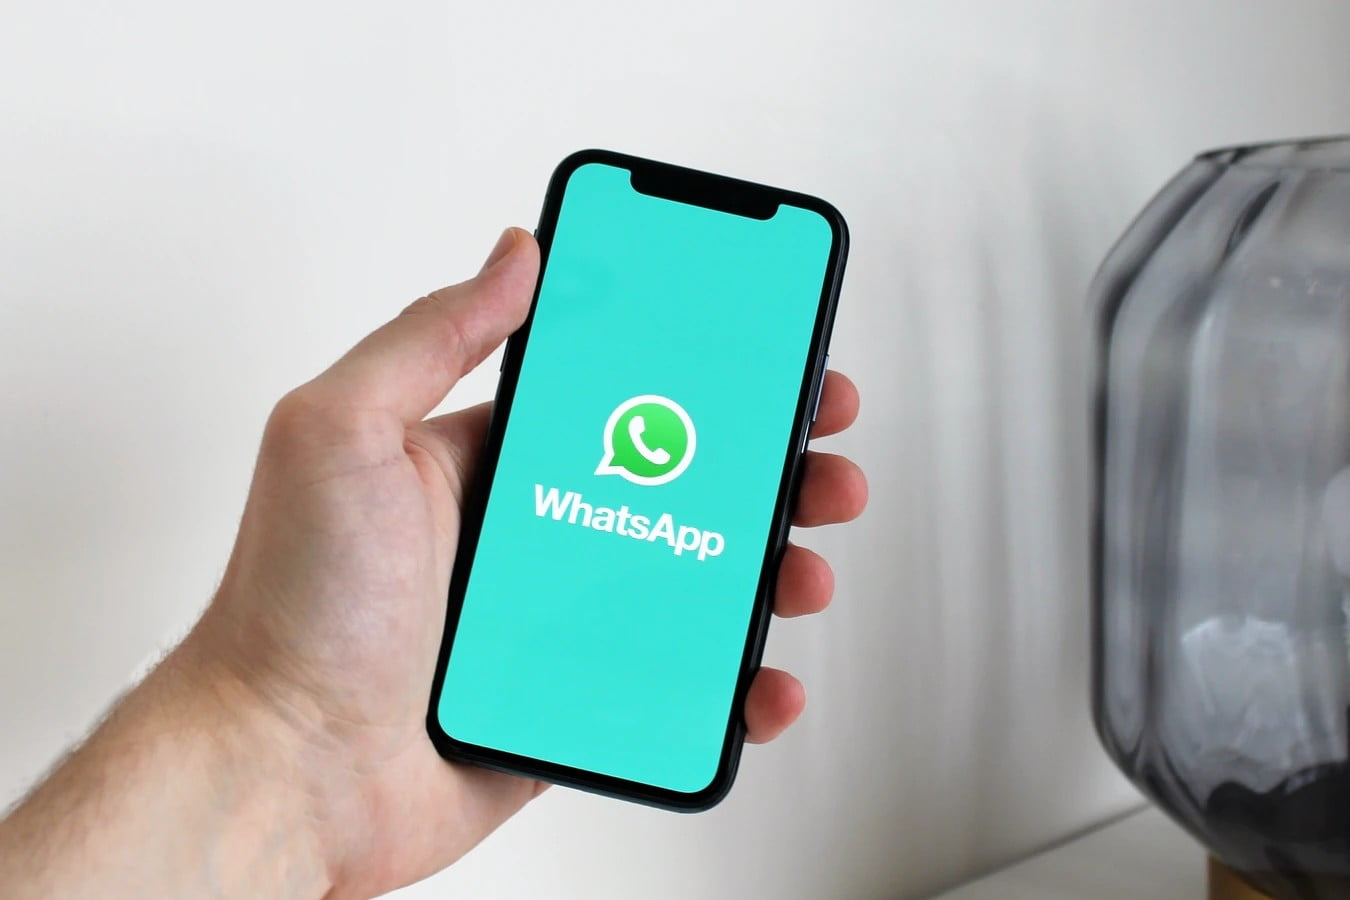 Now you can speed up audio messaging on WhatsApp